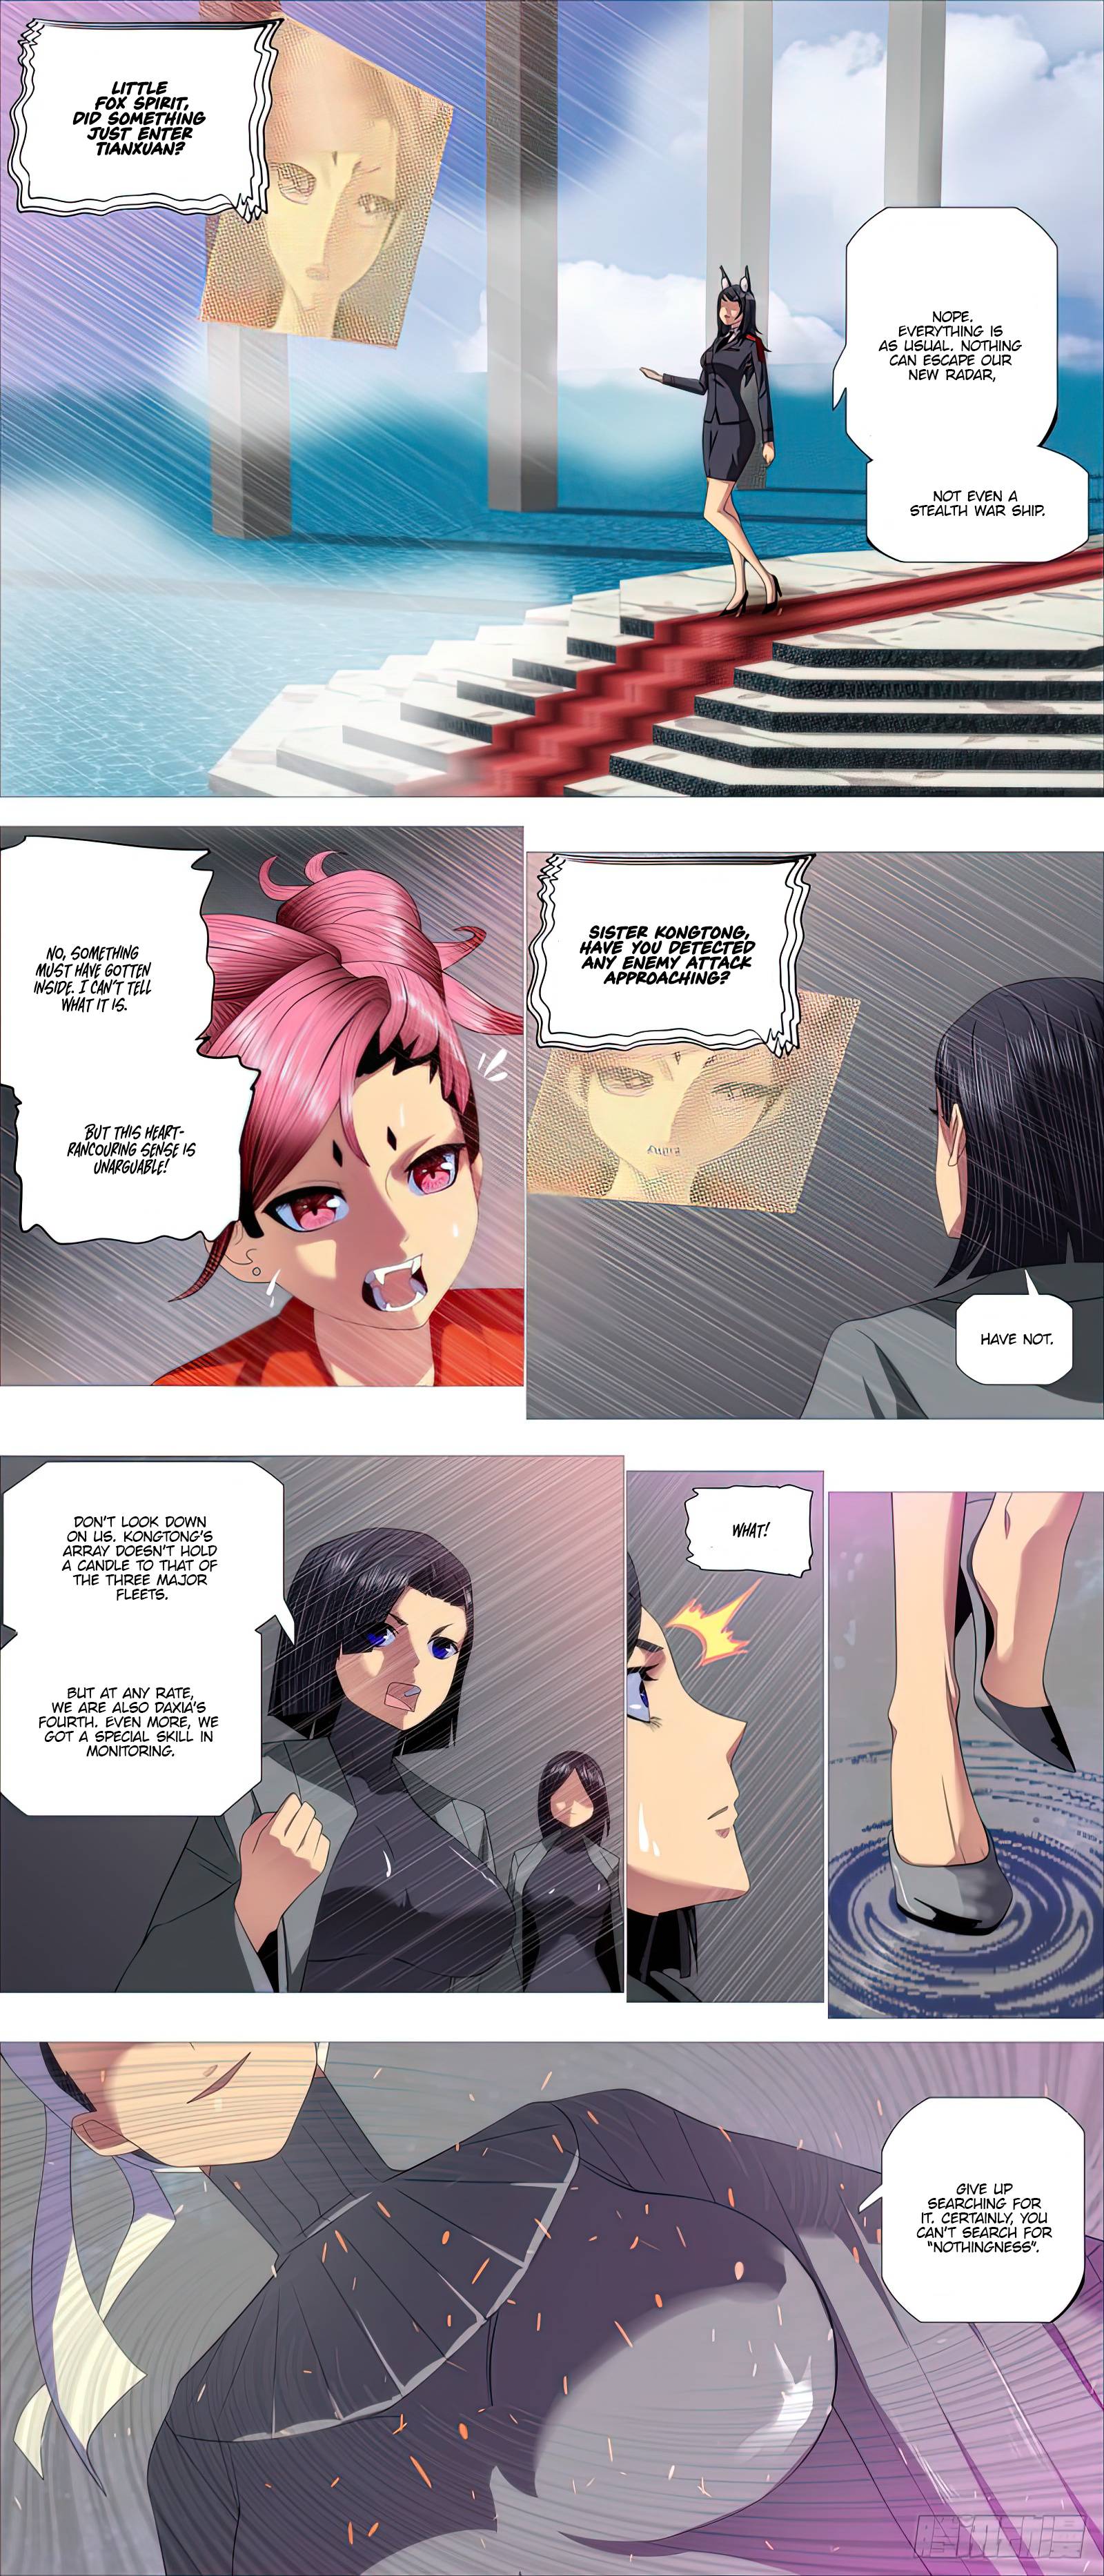 Iron Ladies chapter 468 page 9